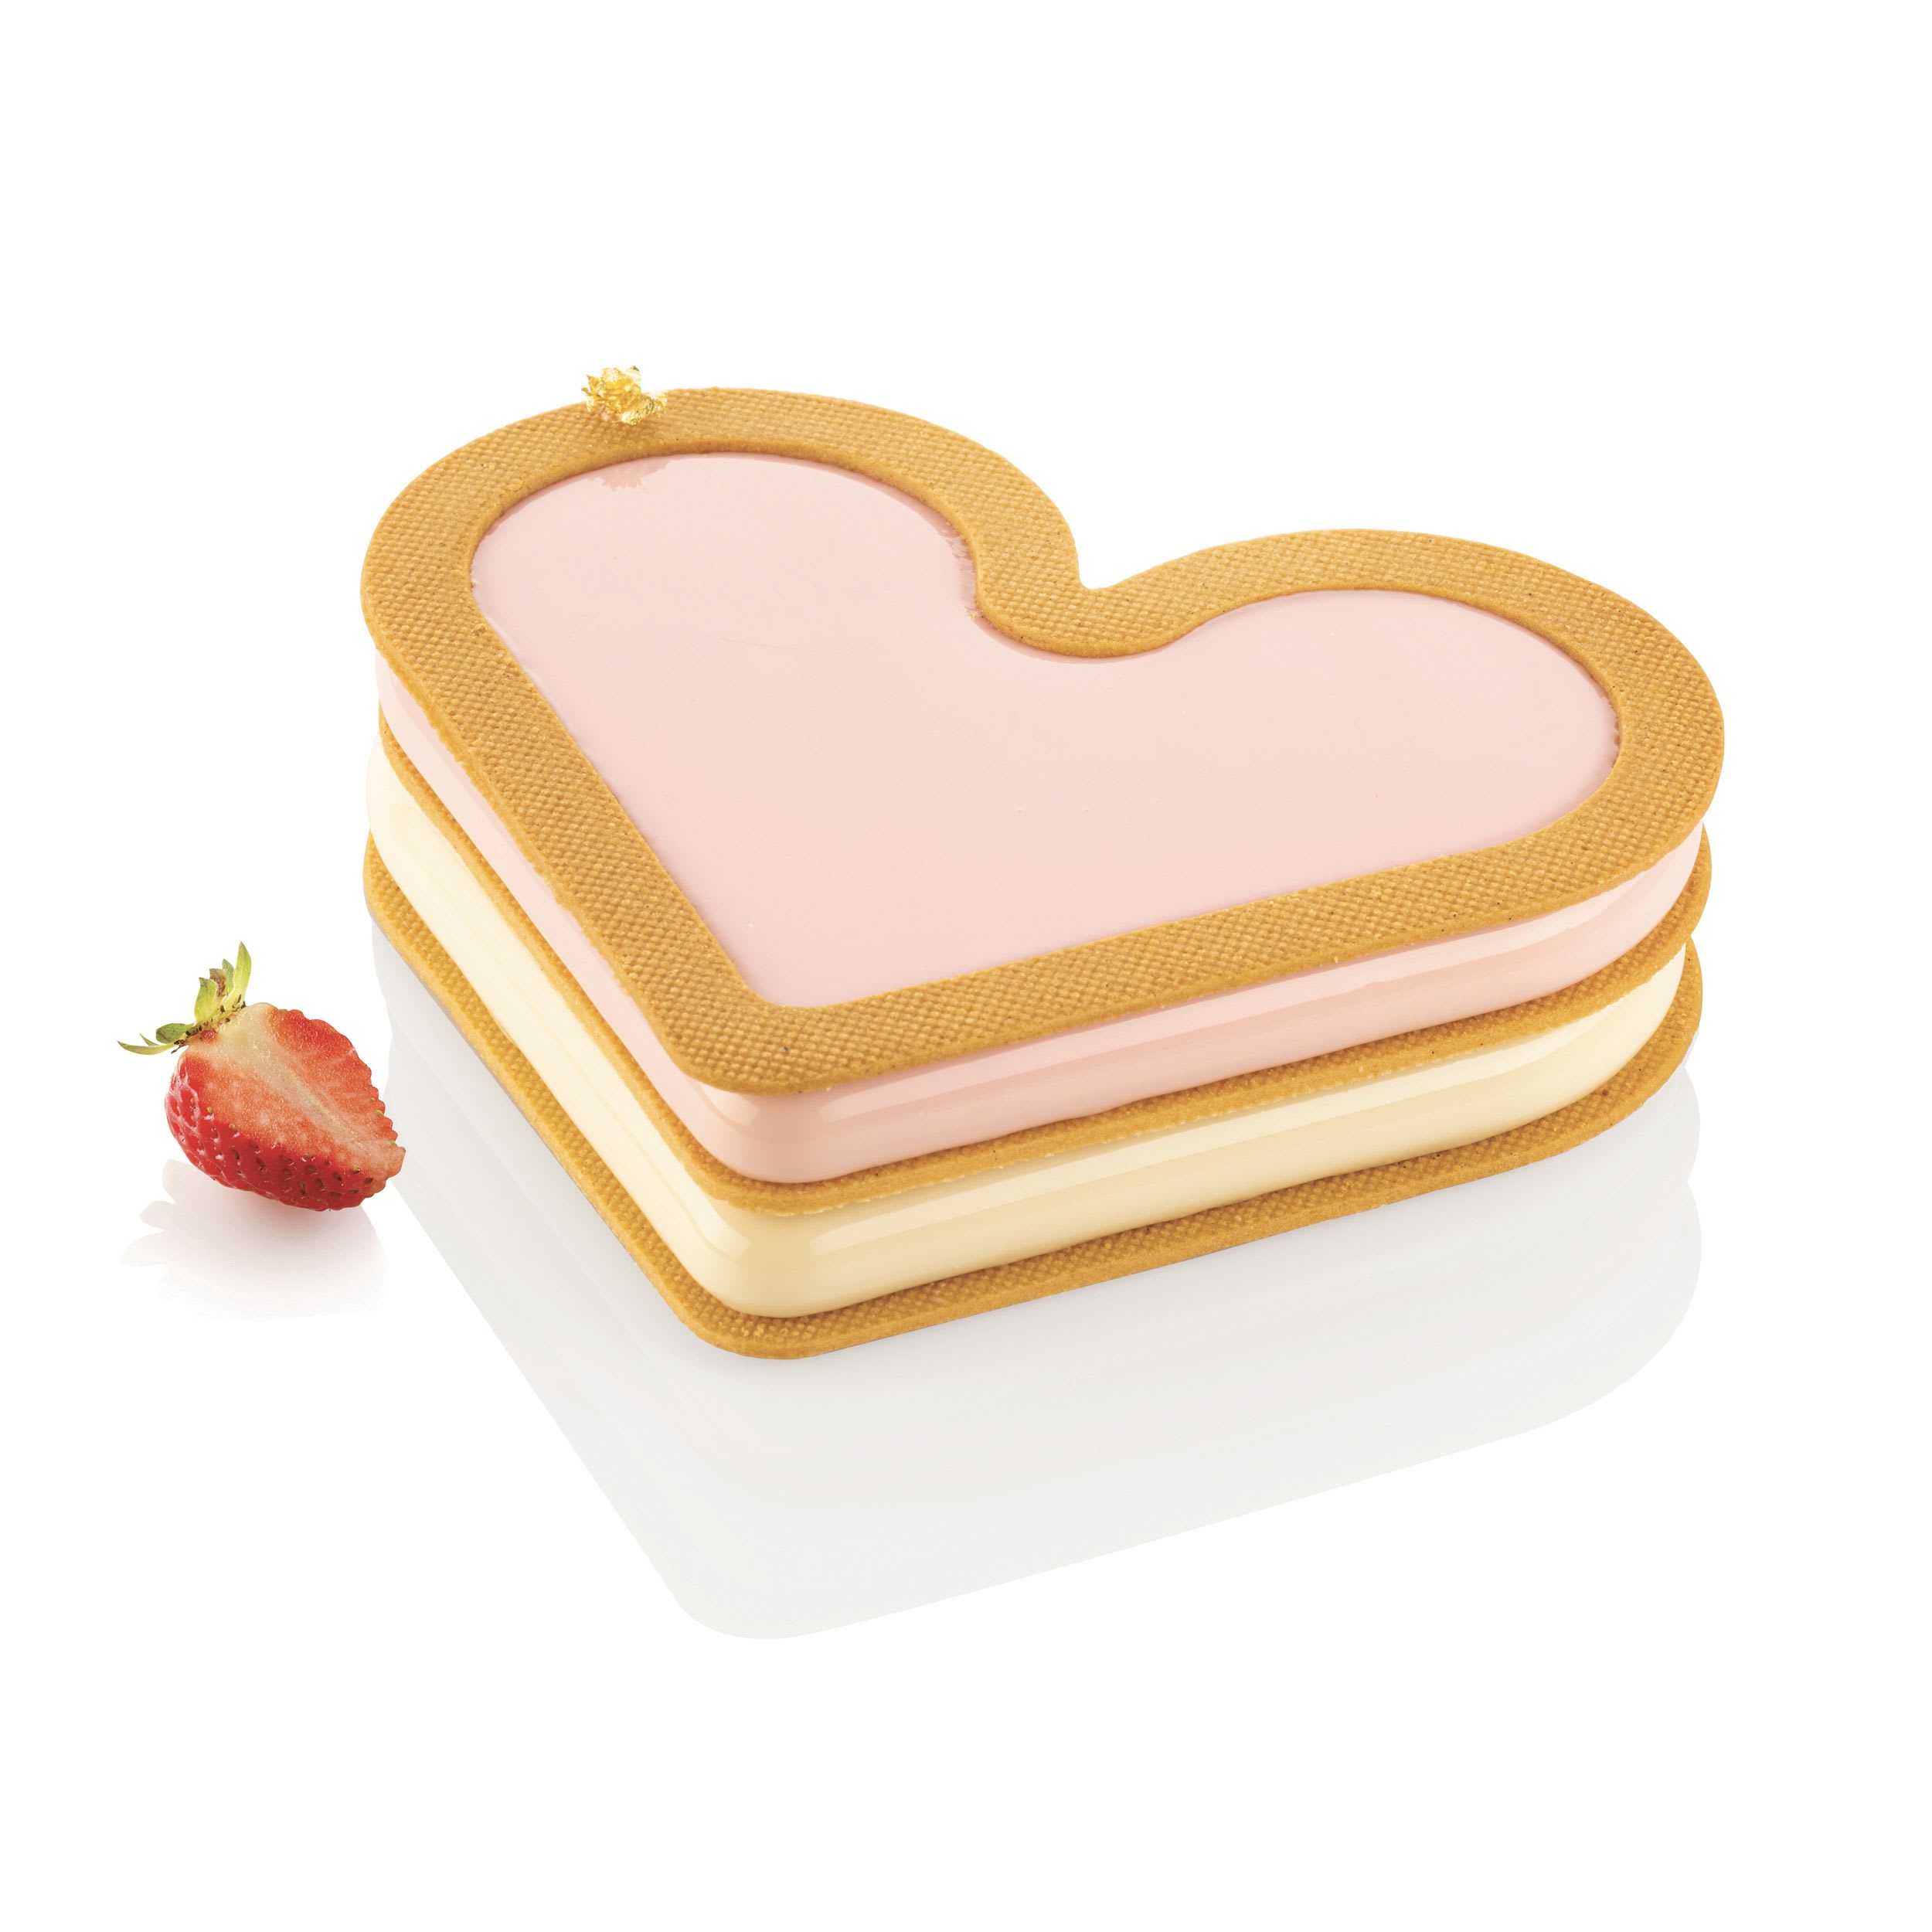 Silikomart AMORE Individual Heart-Shaped Silicone Baking Mold with Border  and Plastic Cutter - 5 1/2 x 5 5/16 x 1 7/8 Cavity